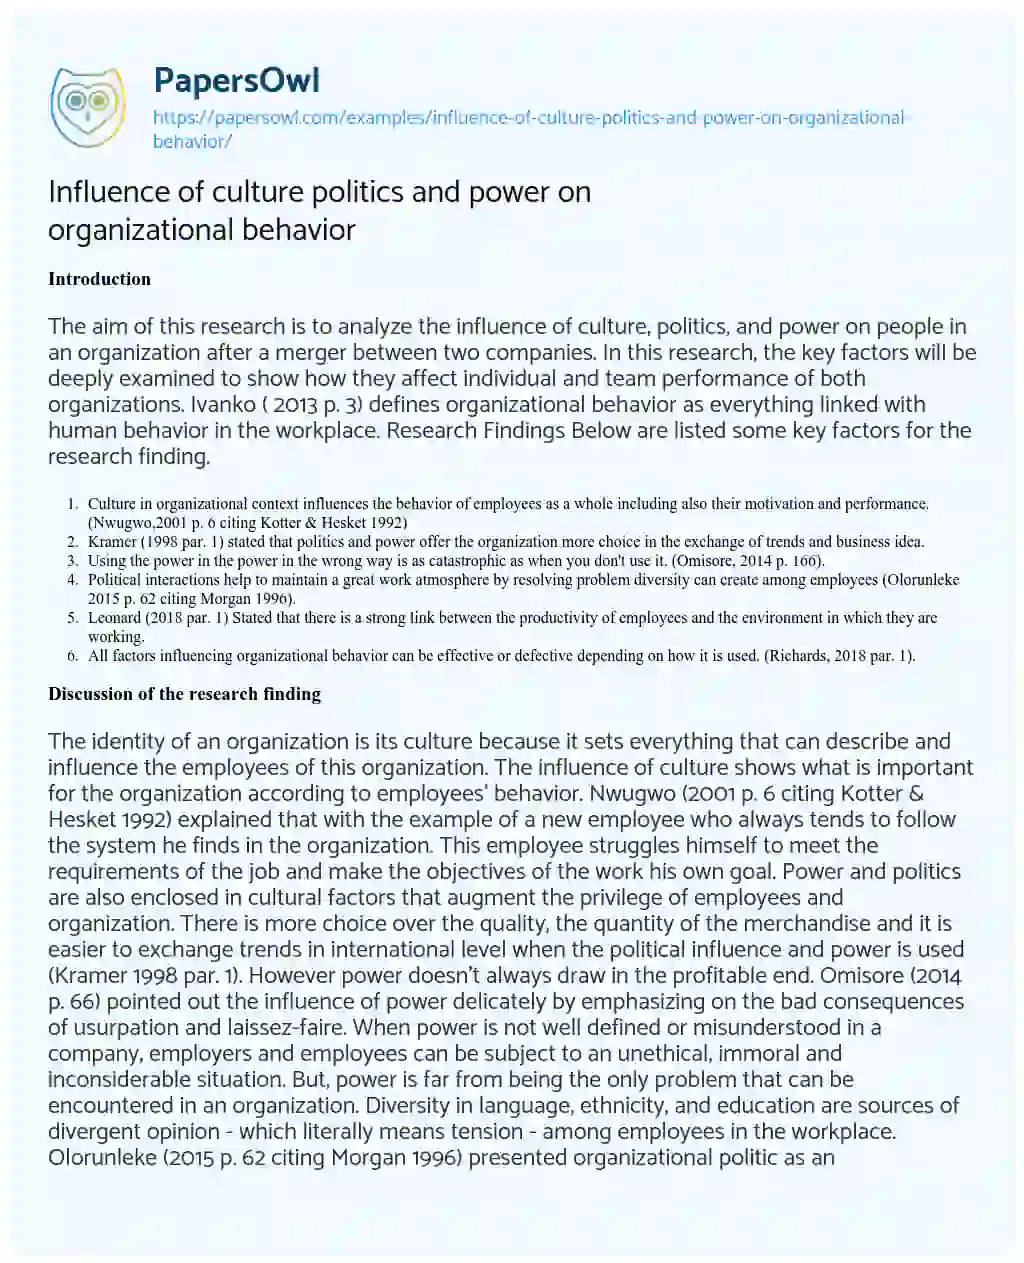 Essay on Influence of Culture Politics and Power on Organizational Behavior